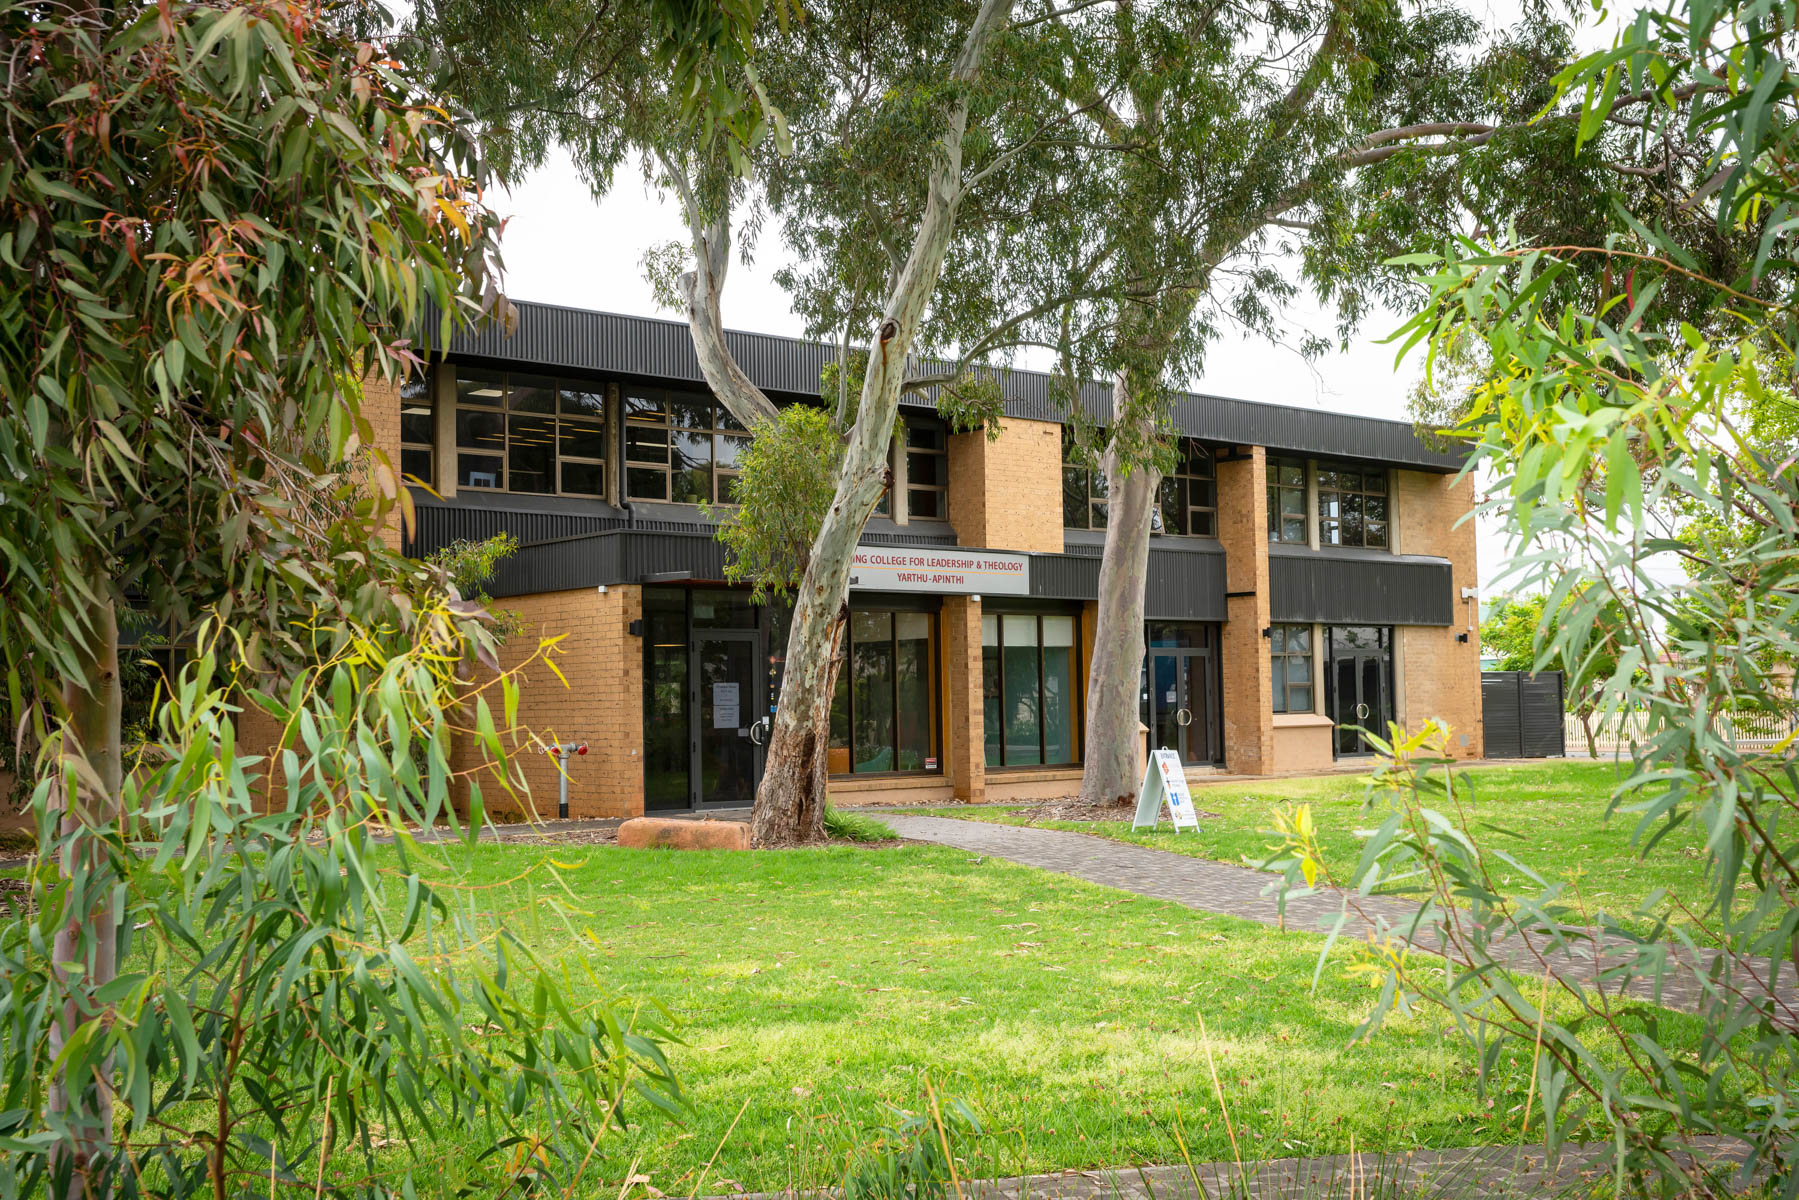 The exterior of Uniting College for Leadership and Theology, surrounded by green grass and gum trees.